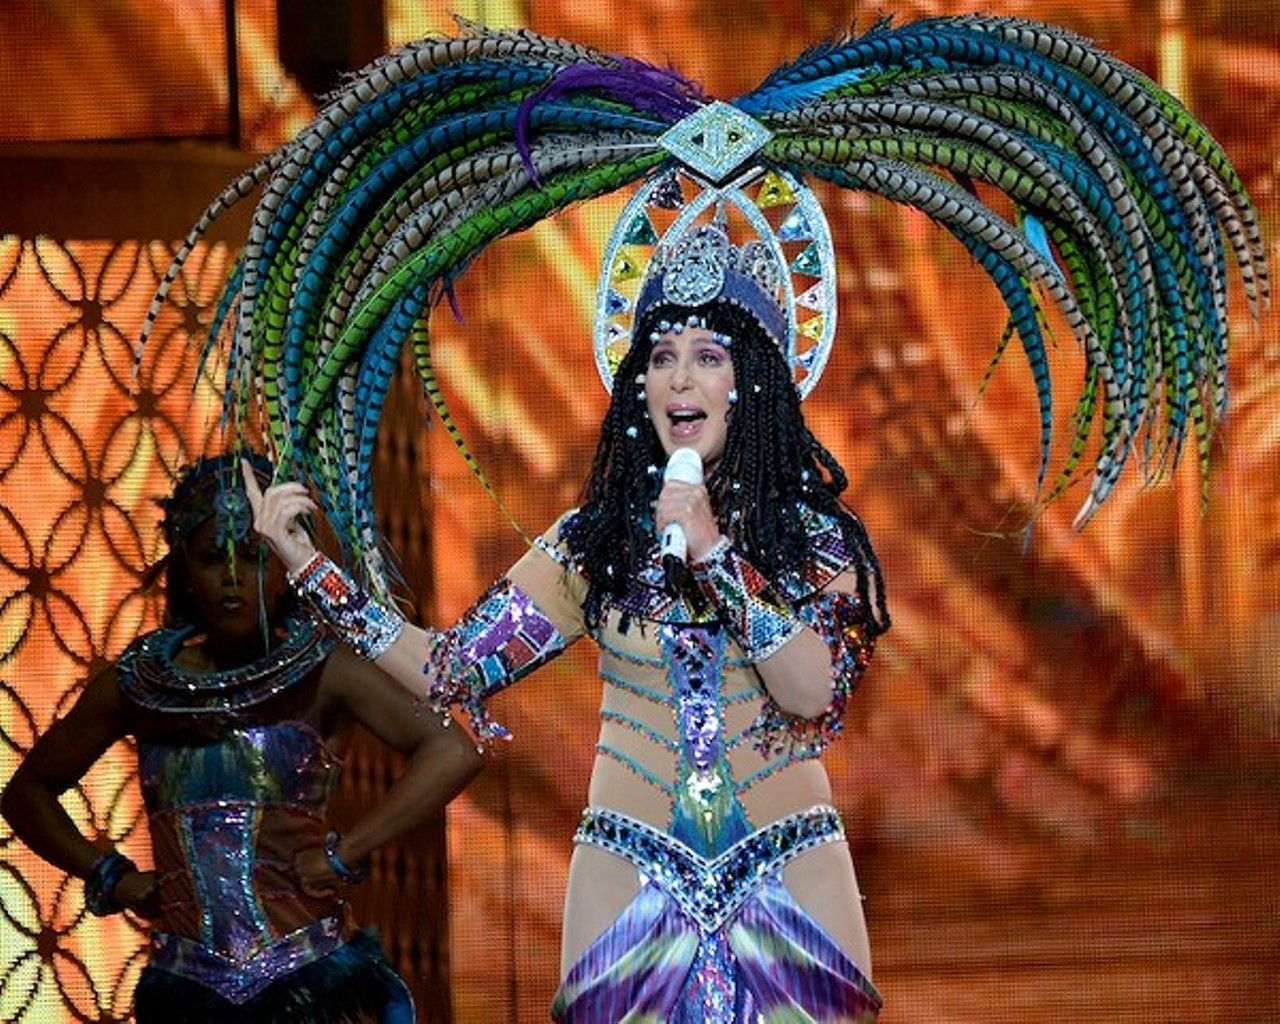 Cher at the Q 
Wed, Feb. 6
Photo by Joe Kleon